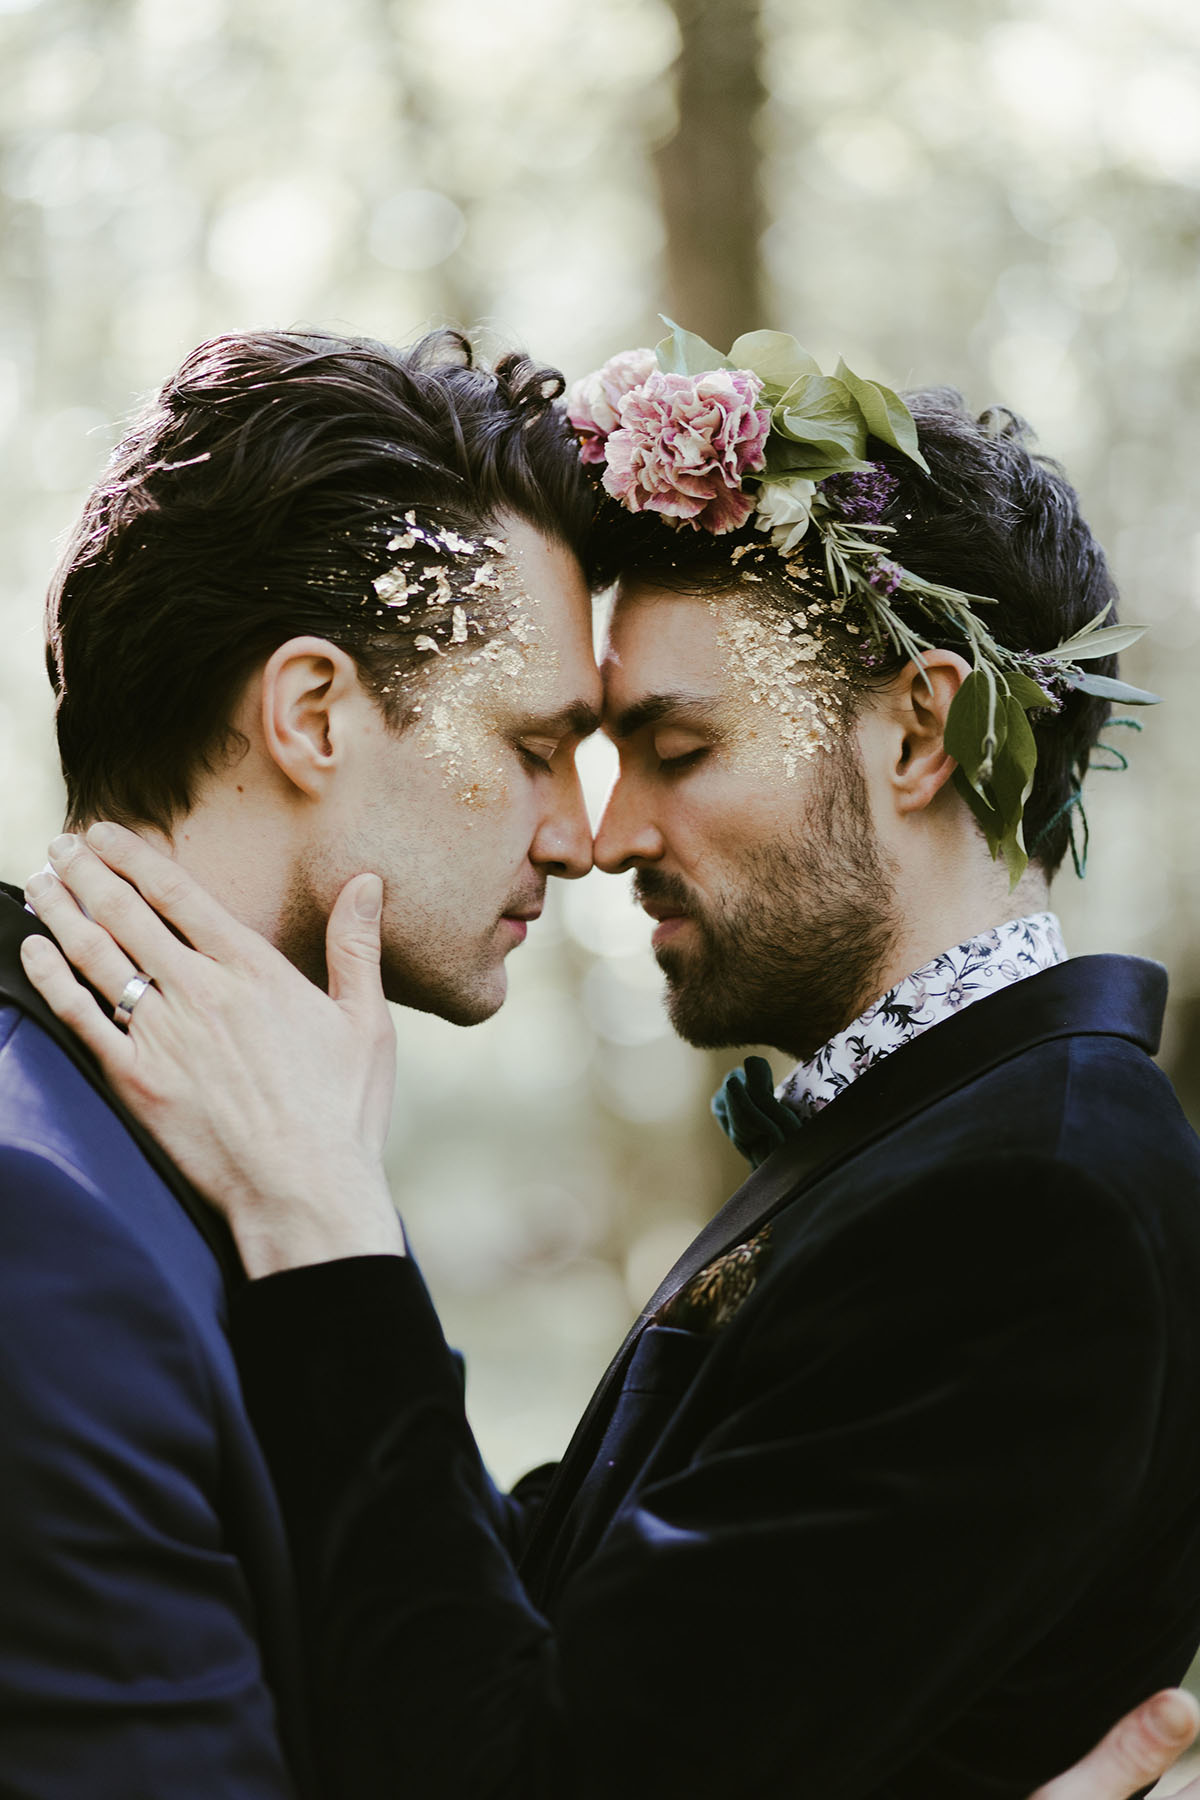 Creative wildflower elopement inspiration in the woods two grooms flowers floral veil suits creative unique styled shoot